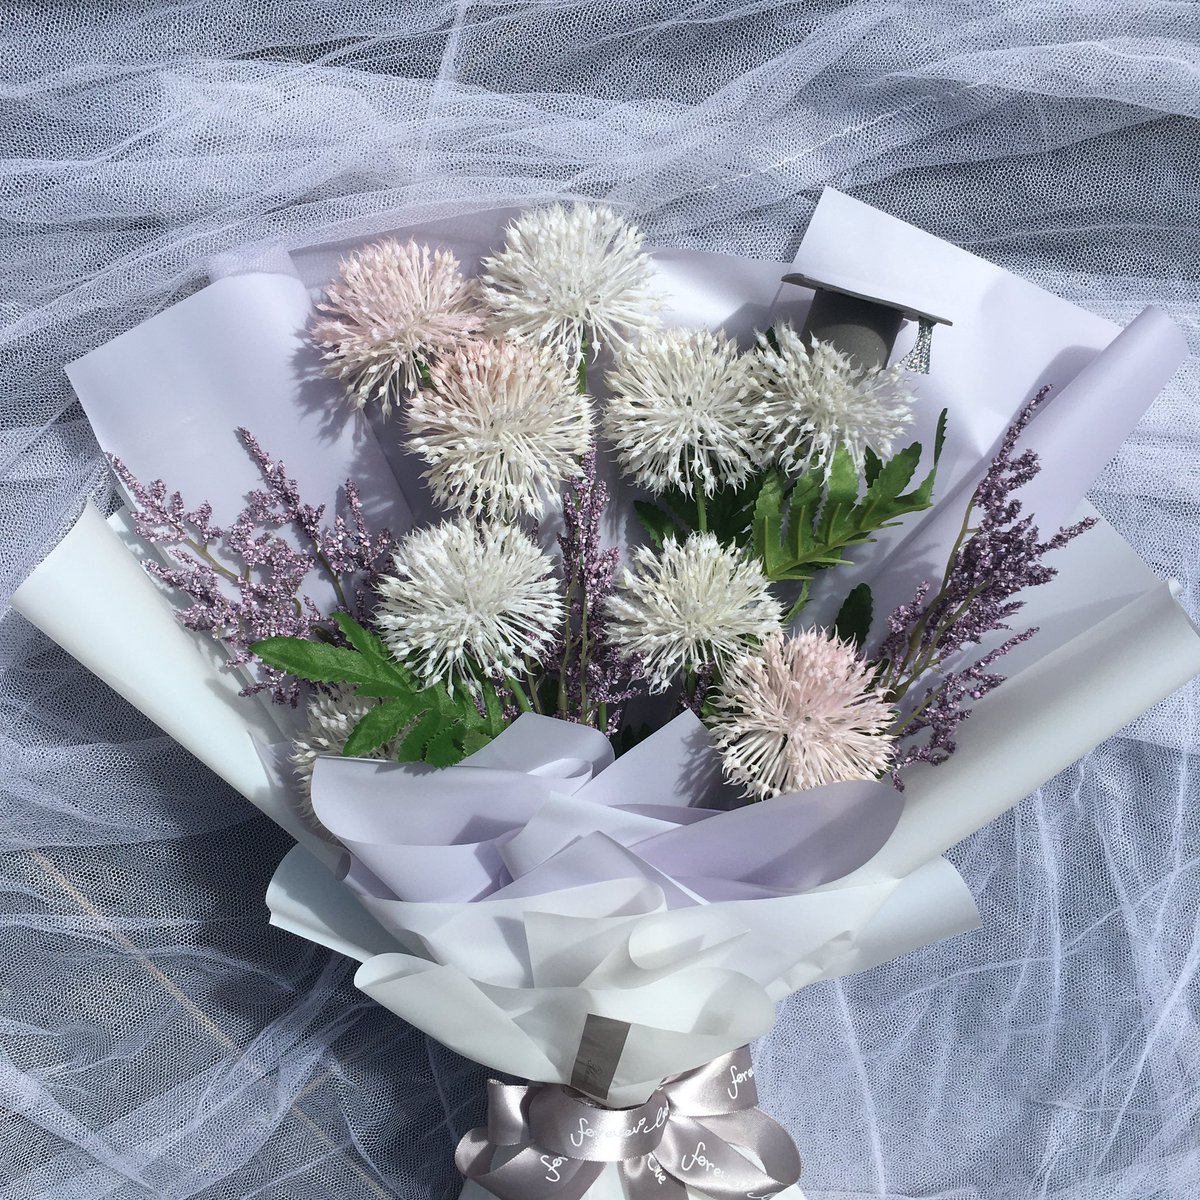 Graduation Flower Bouquet with affordable prices. Can check out more at Instagram: @blumebyjuju #graduationbouquet #flowerbouquet #bouquetkl #surprisebouquet #giftkl #flowerkl